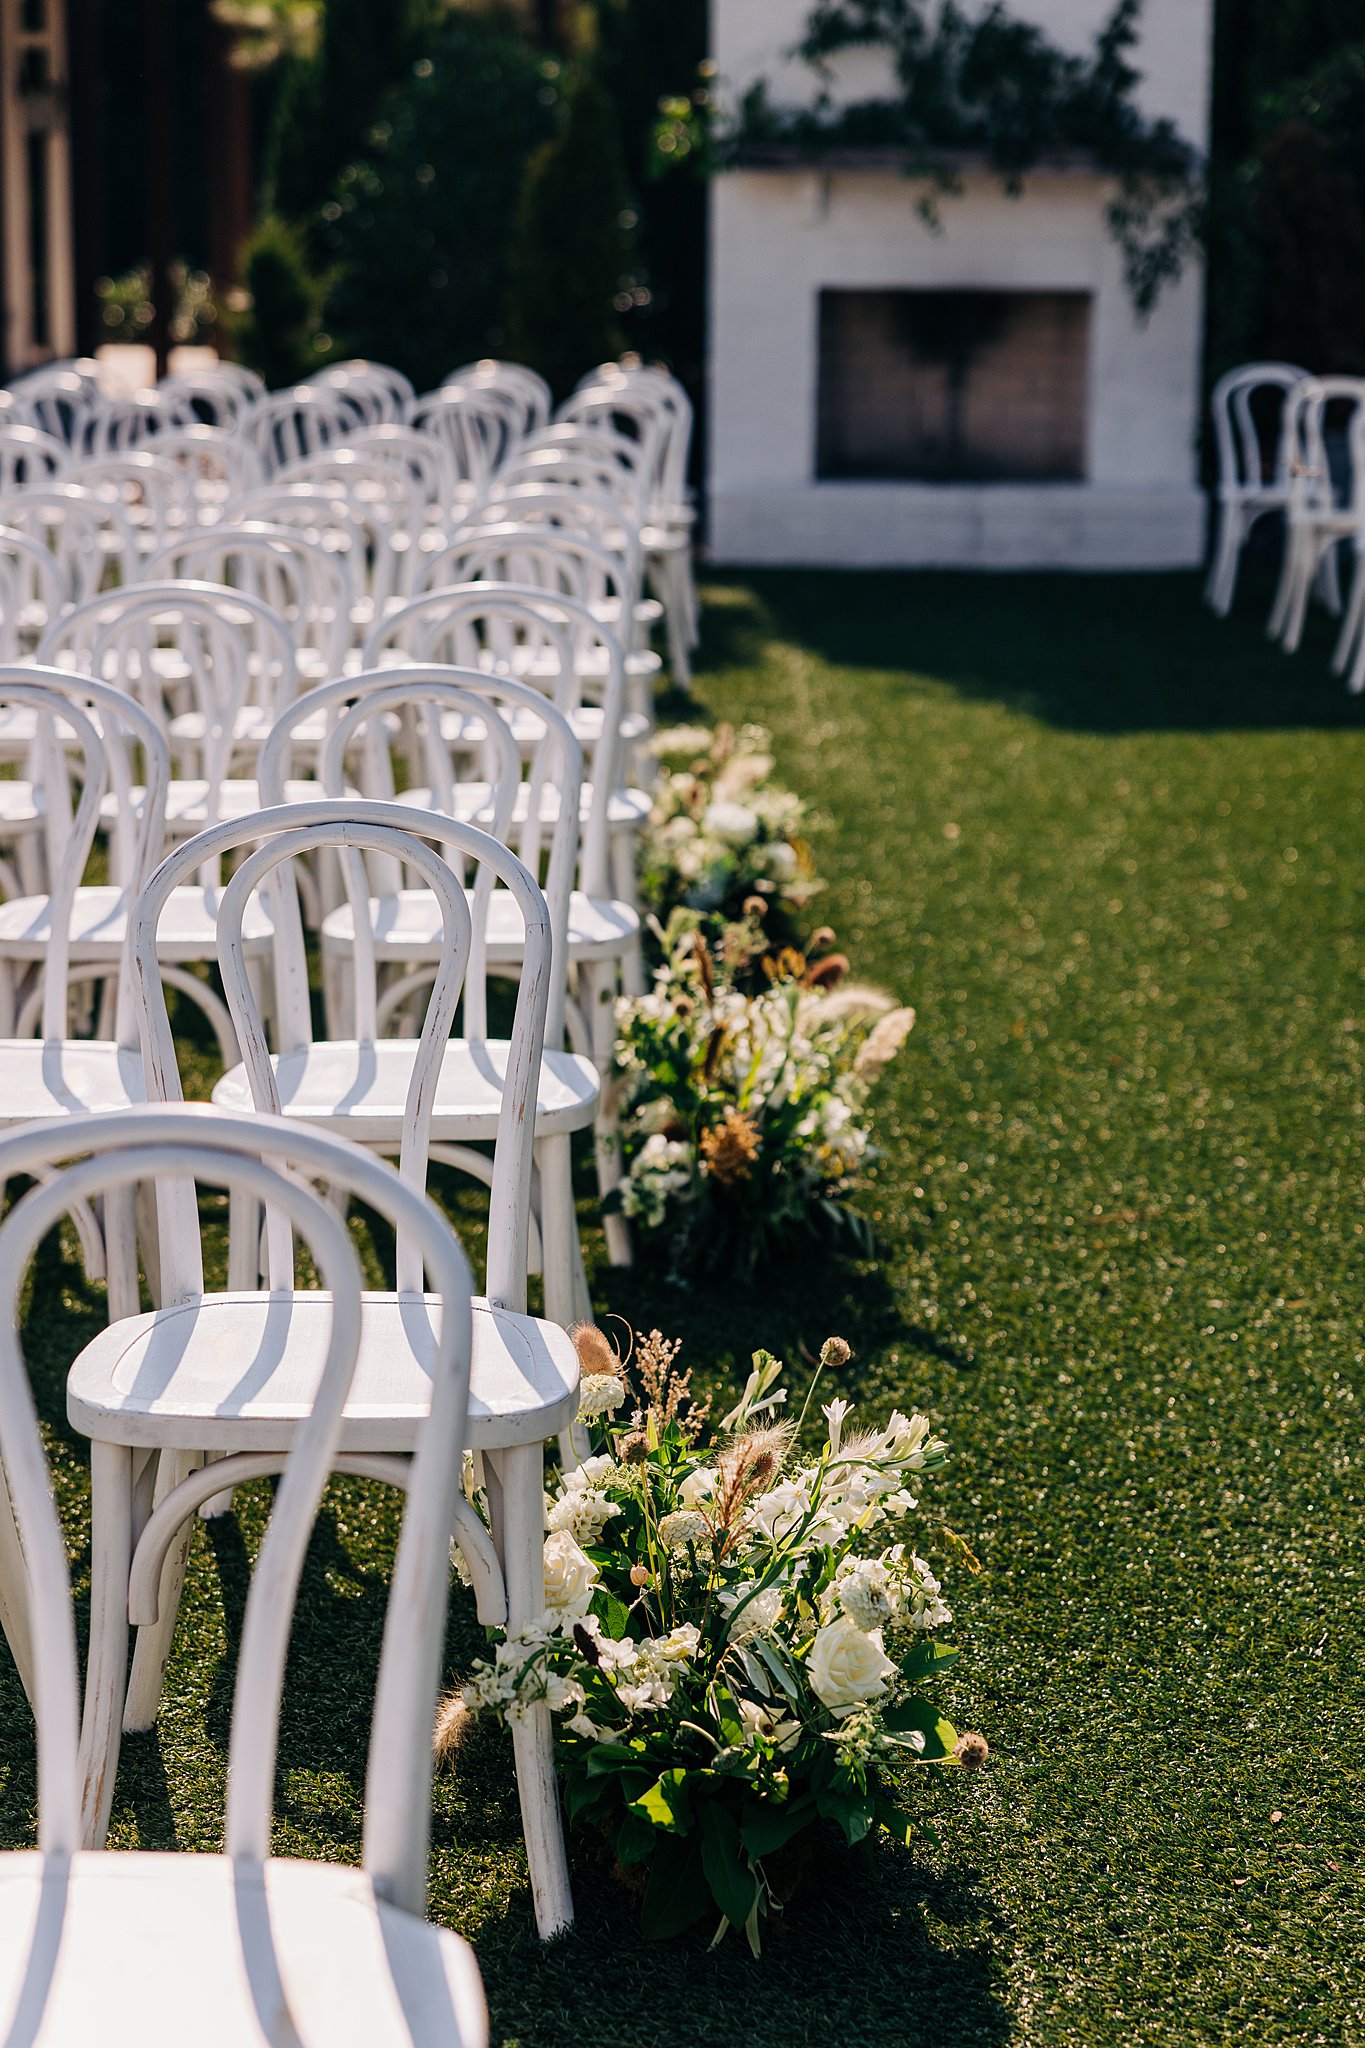 Details of a wedding reception set up on a lawn with flowers and white chairs at the bradford wedding venue